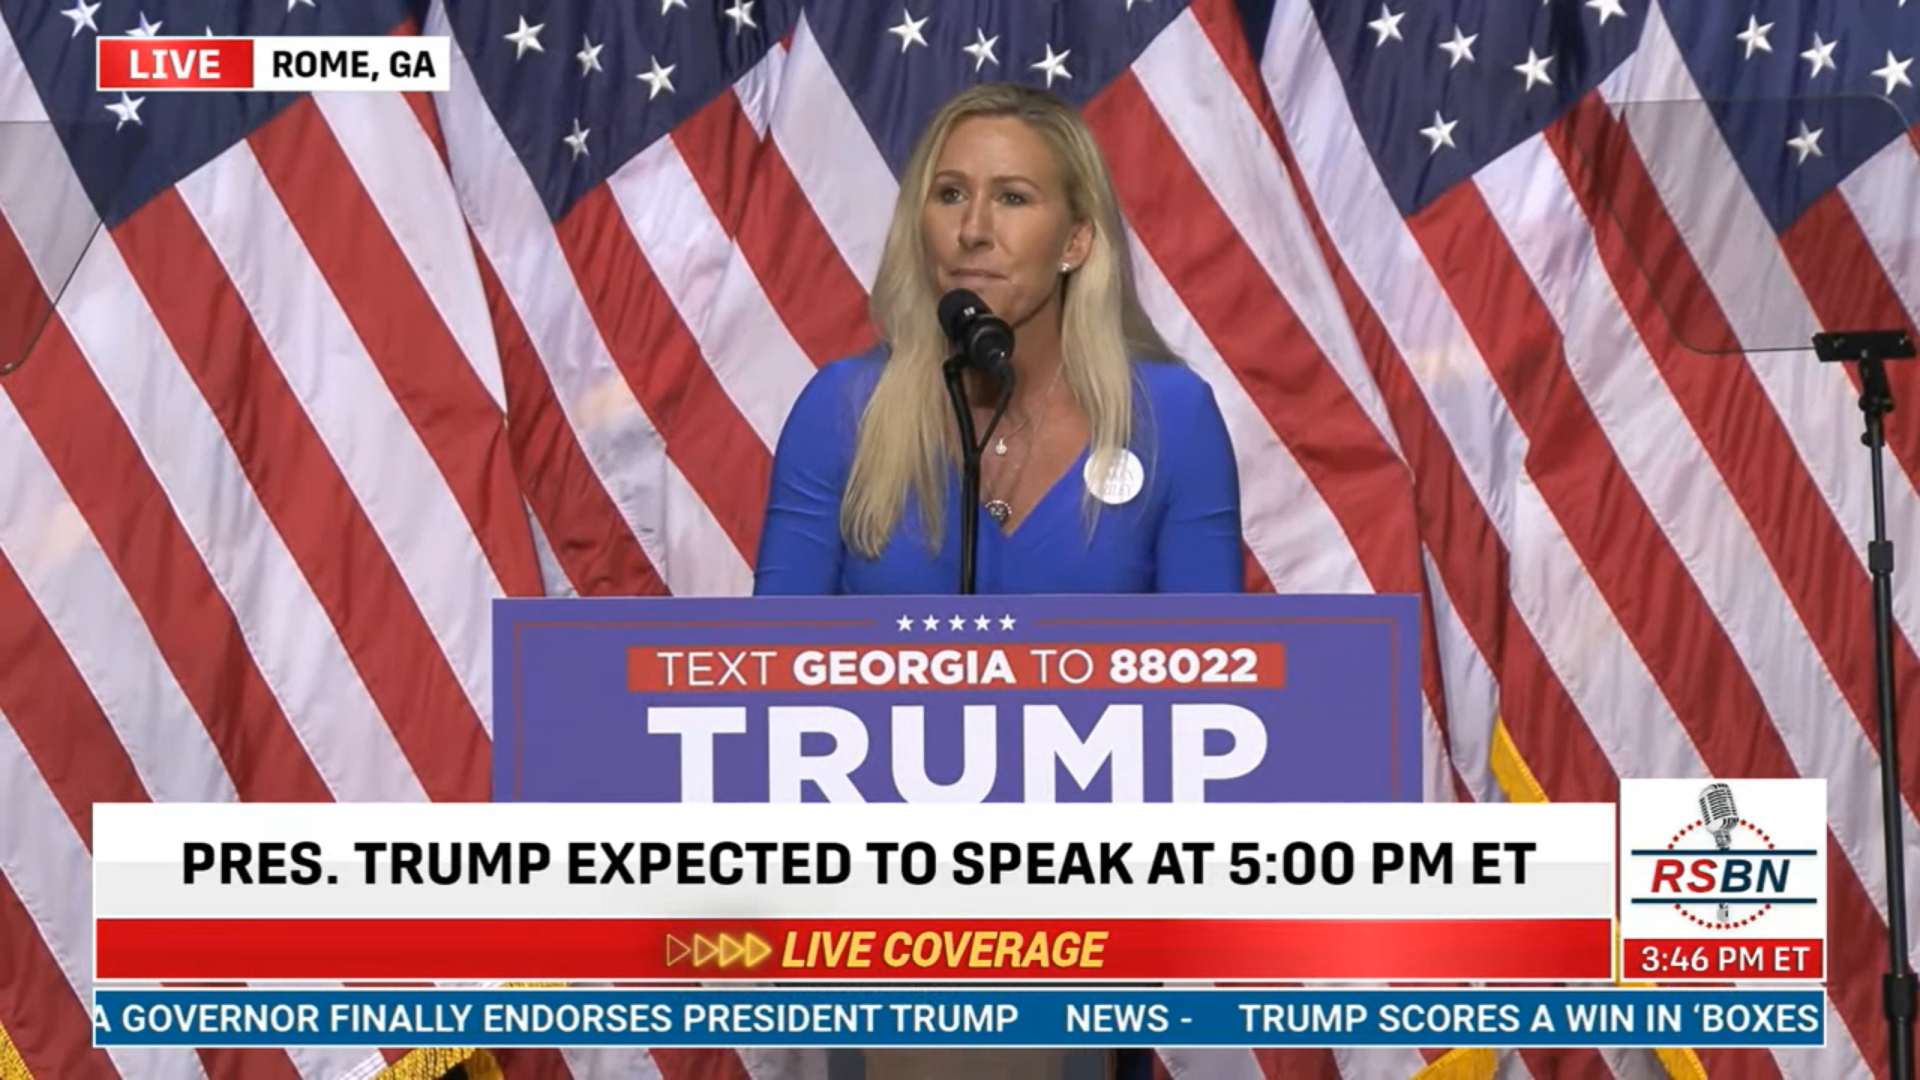 Marjorie Taylor Greene Hypes Up Trump Crowd in Rome, Georgia